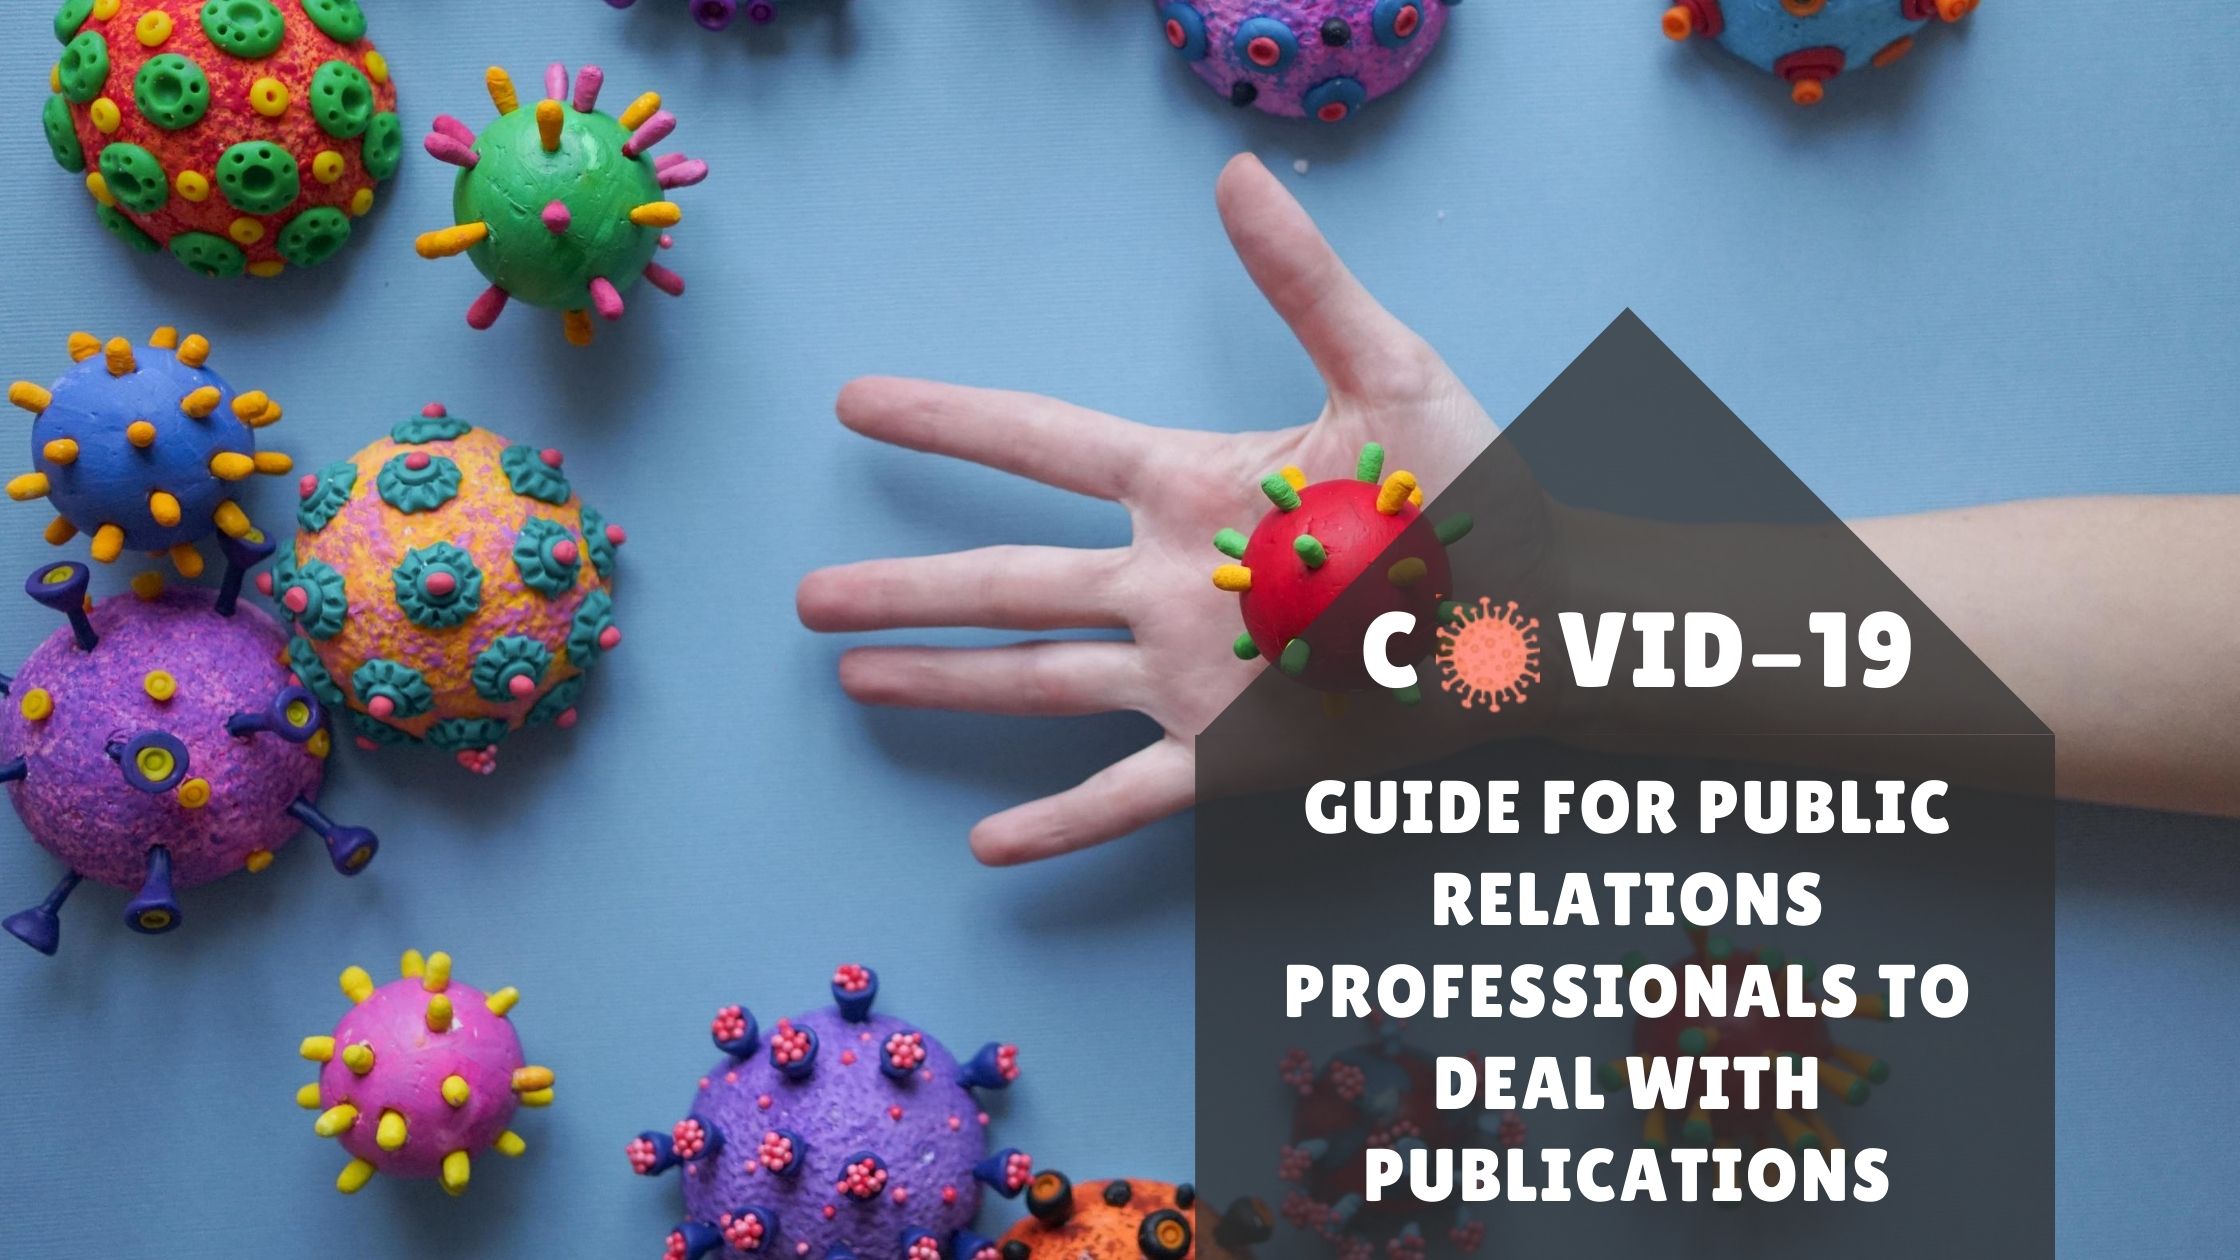 Covid 19 Guide for Public Relations